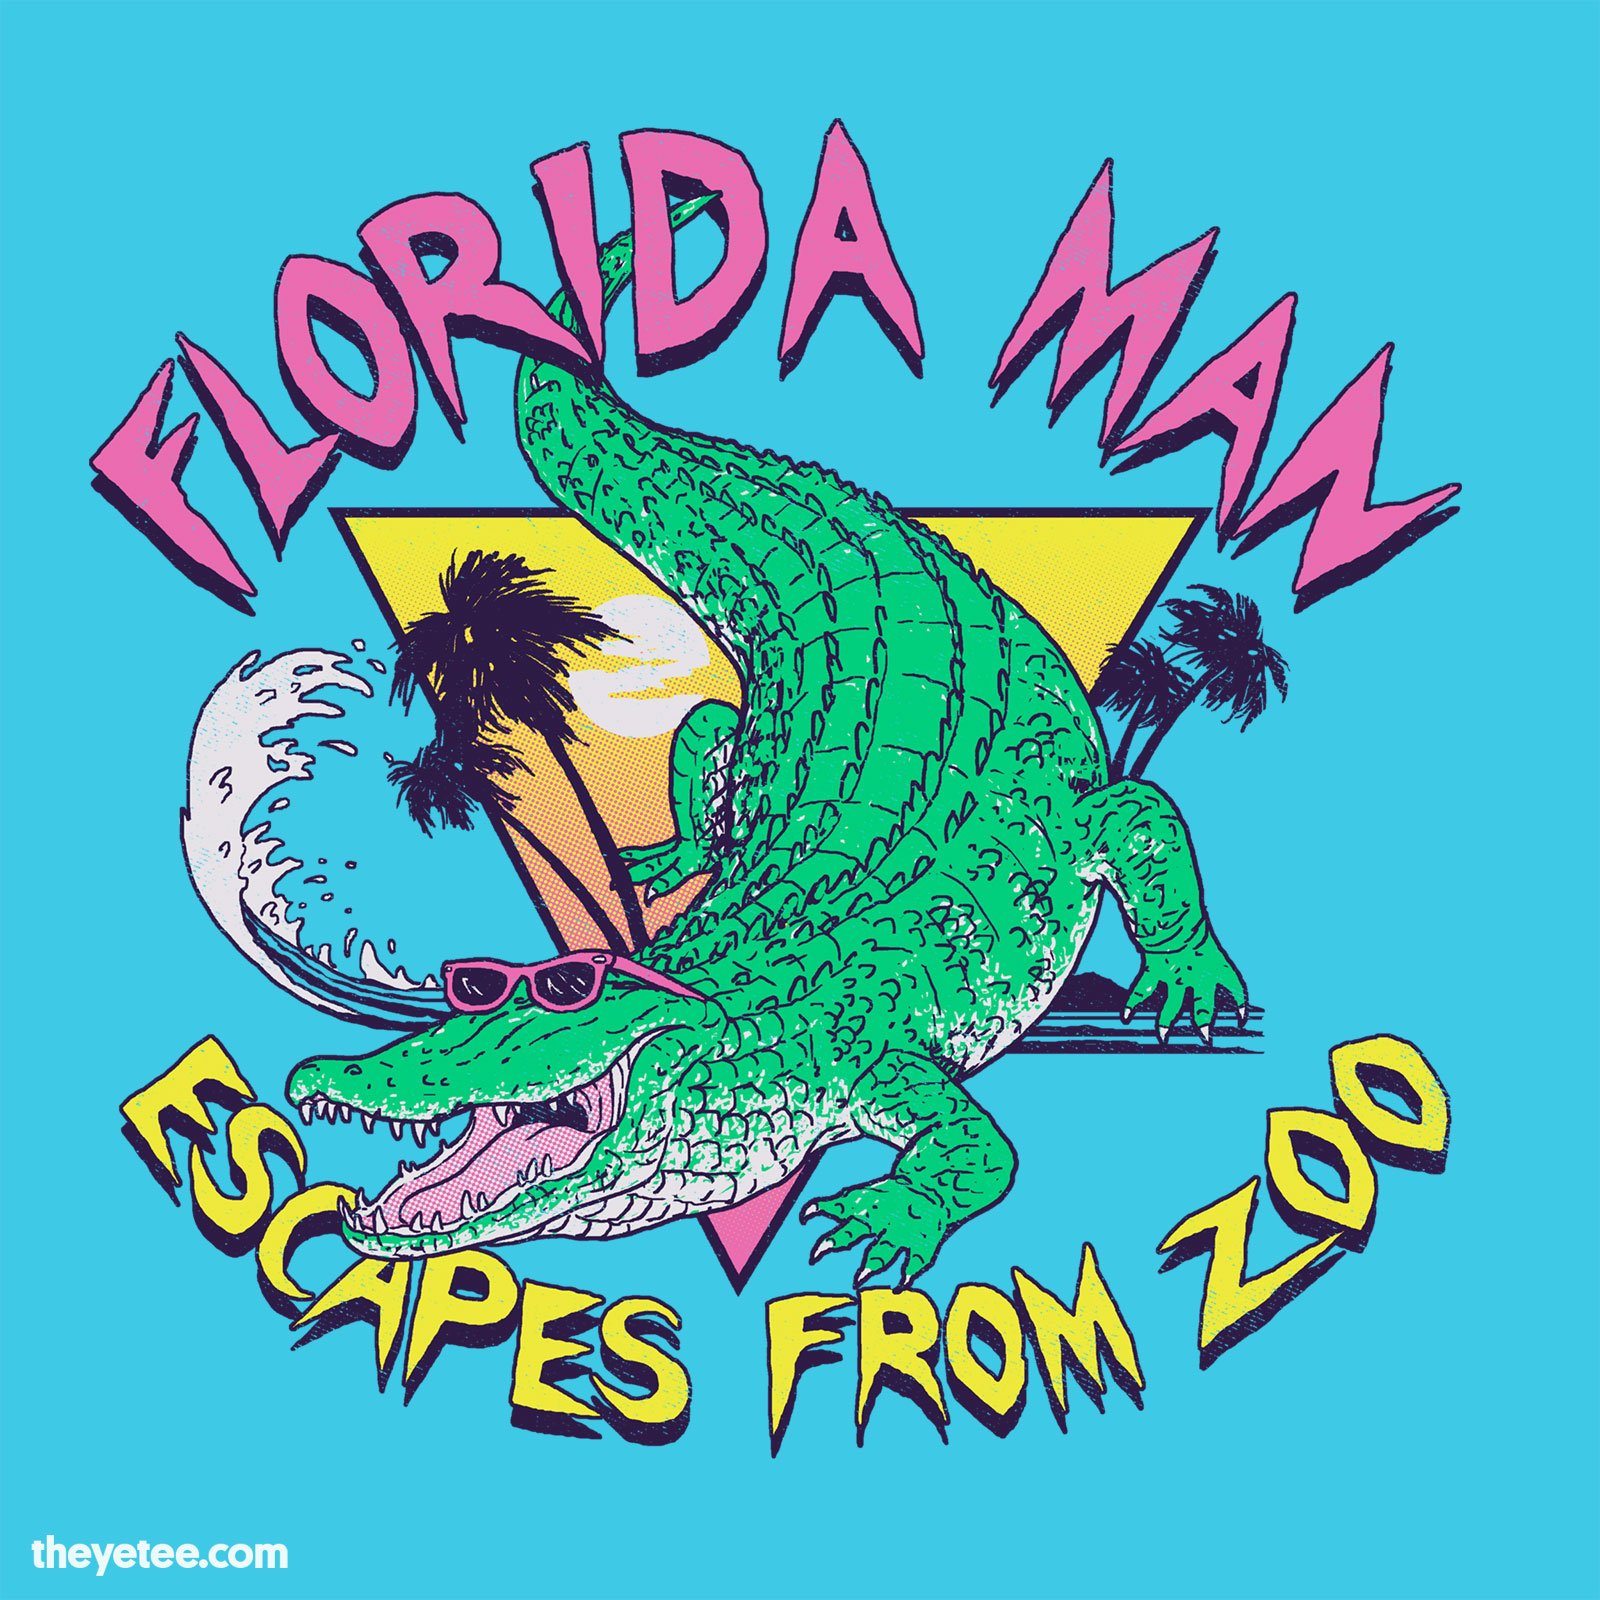 Image of Florida Man Escapes From Zoo